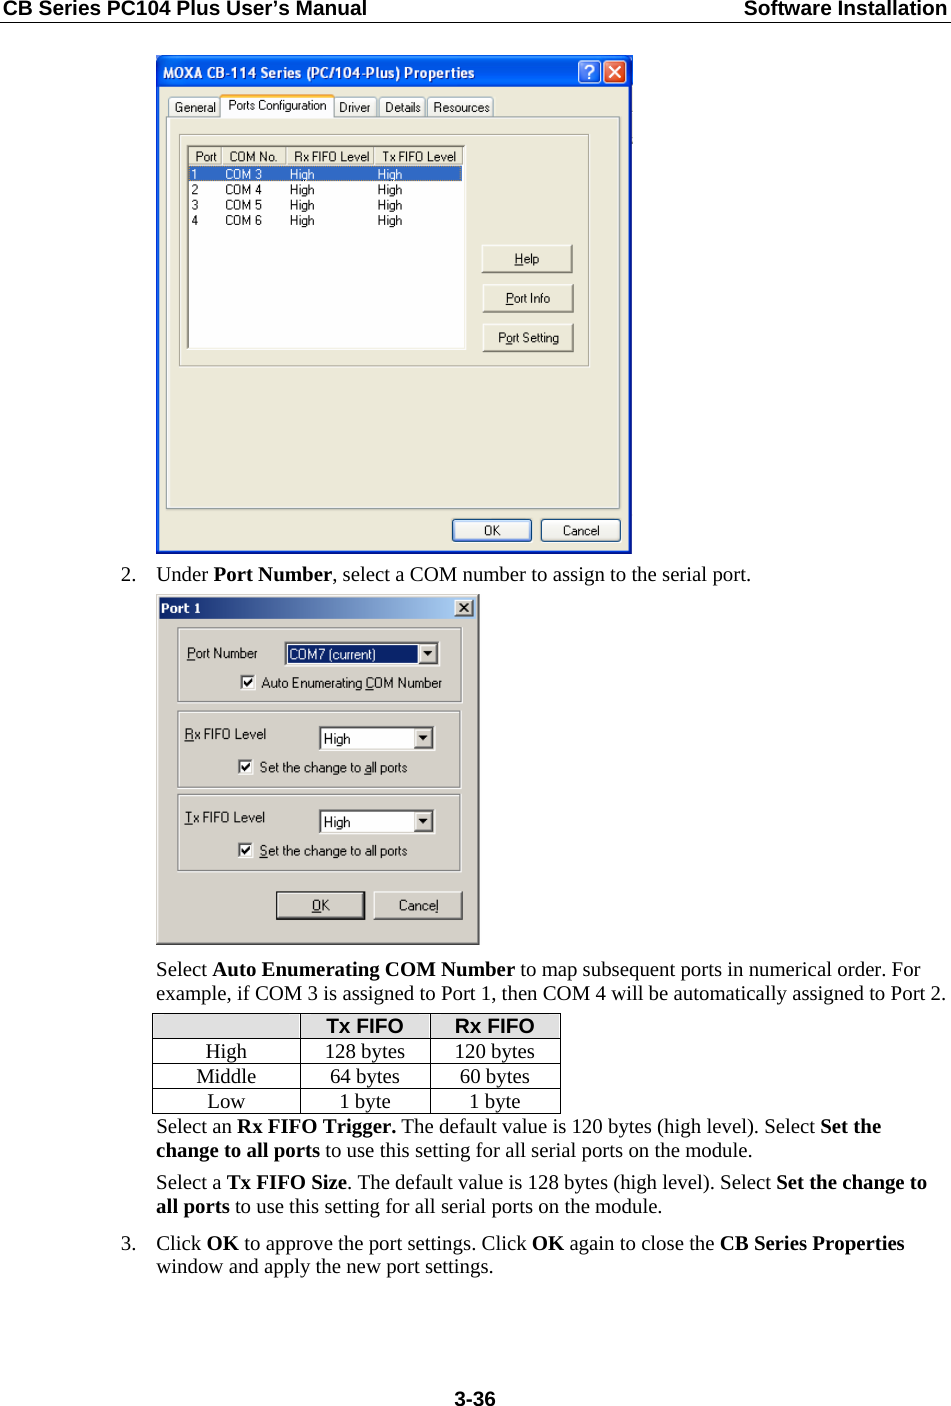 CB Series PC104 Plus User’s Manual  Software Installation  2. Under Port Number, select a COM number to assign to the serial port.  Select Auto Enumerating COM Number to map subsequent ports in numerical order. For example, if COM 3 is assigned to Port 1, then COM 4 will be automatically assigned to Port 2.  Tx FIFO  Rx FIFO High  128 bytes  120 bytes Middle  64 bytes  60 bytes Low  1 byte  1 byte Select an Rx FIFO Trigger. The default value is 120 bytes (high level). Select Set the change to all ports to use this setting for all serial ports on the module. Select a Tx FIFO Size. The default value is 128 bytes (high level). Select Set the change to all ports to use this setting for all serial ports on the module. 3. Click OK to approve the port settings. Click OK again to close the CB Series Properties window and apply the new port settings.  3-36